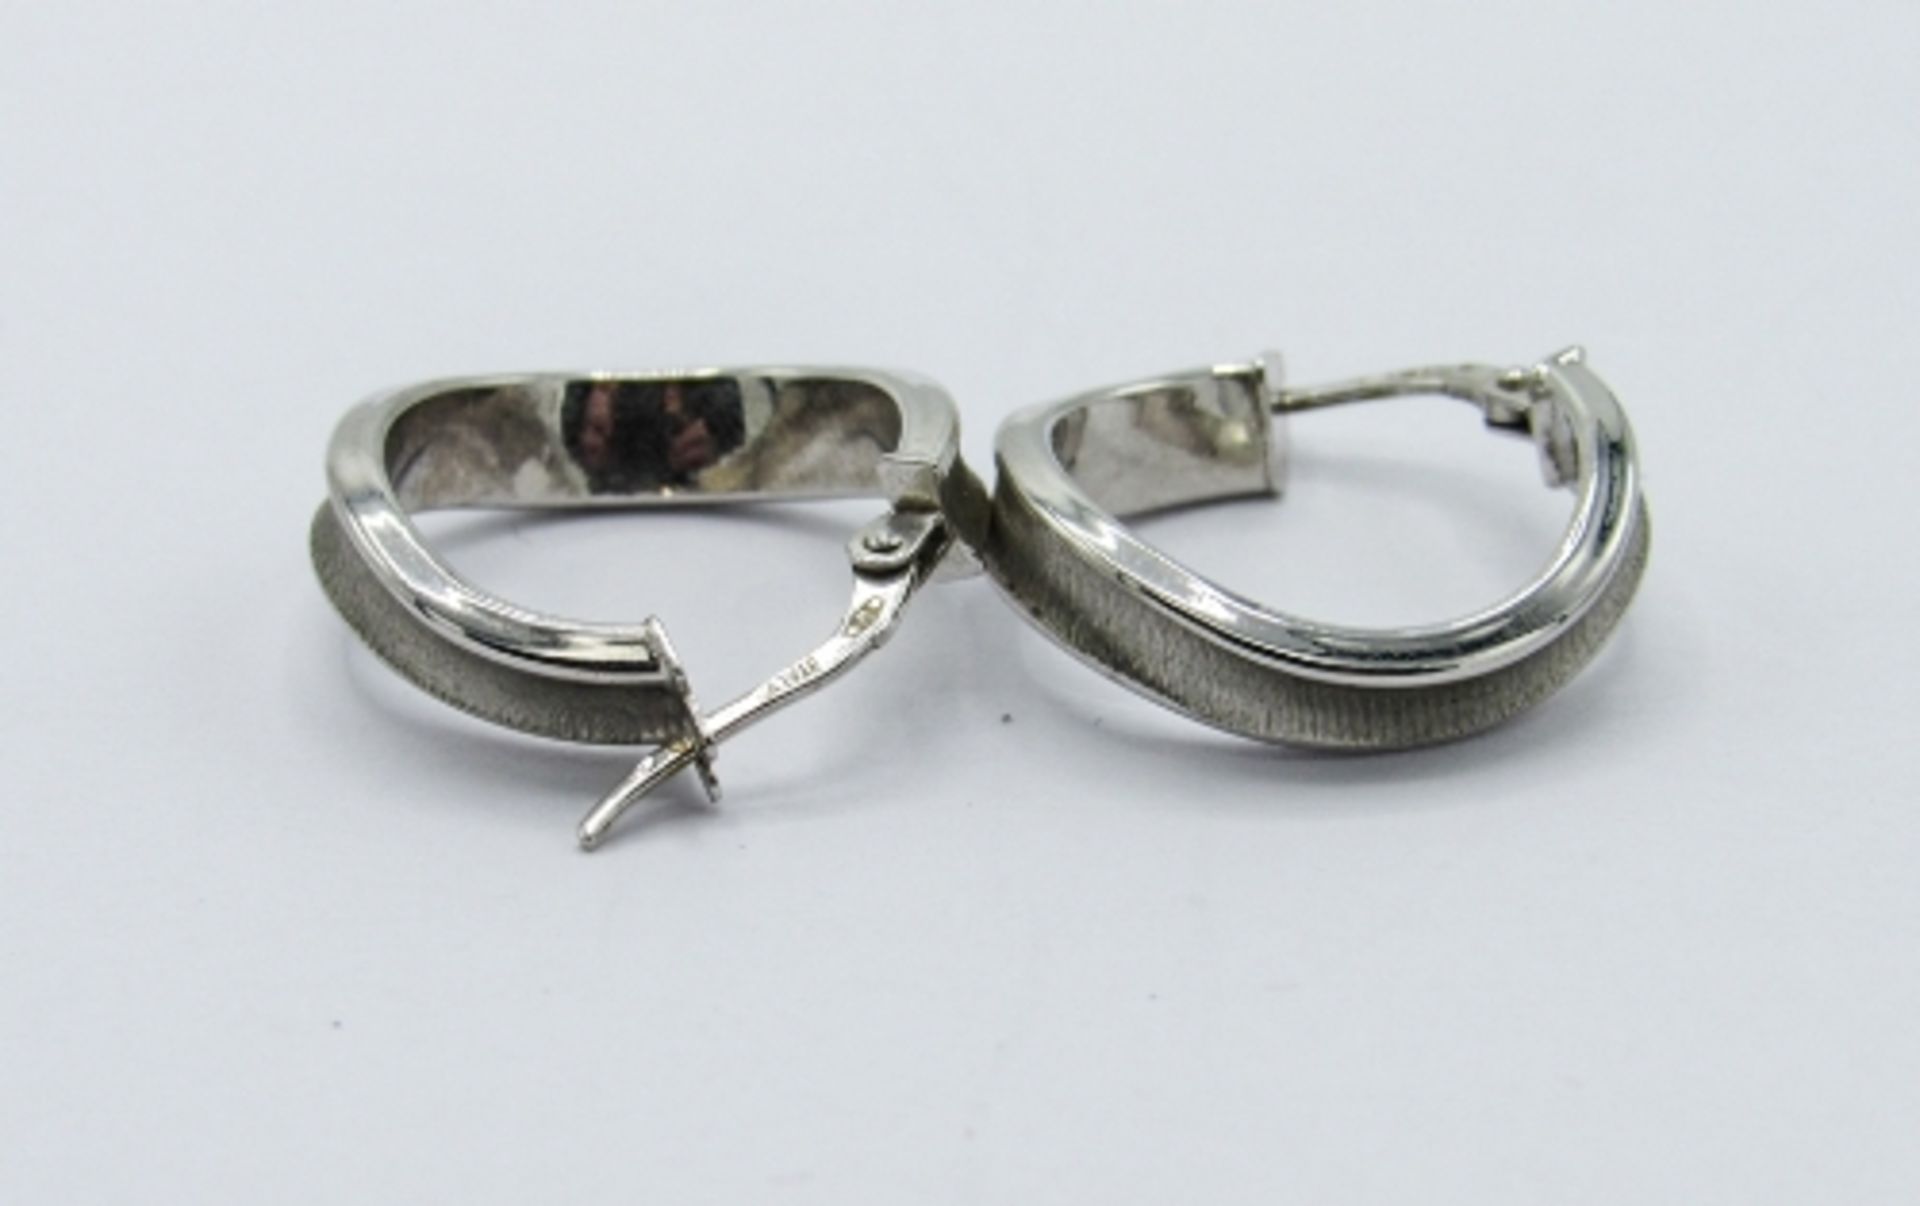 9ct white gold hooped earrings, weight 1.5gms. Estimate £15-20 - Image 2 of 3